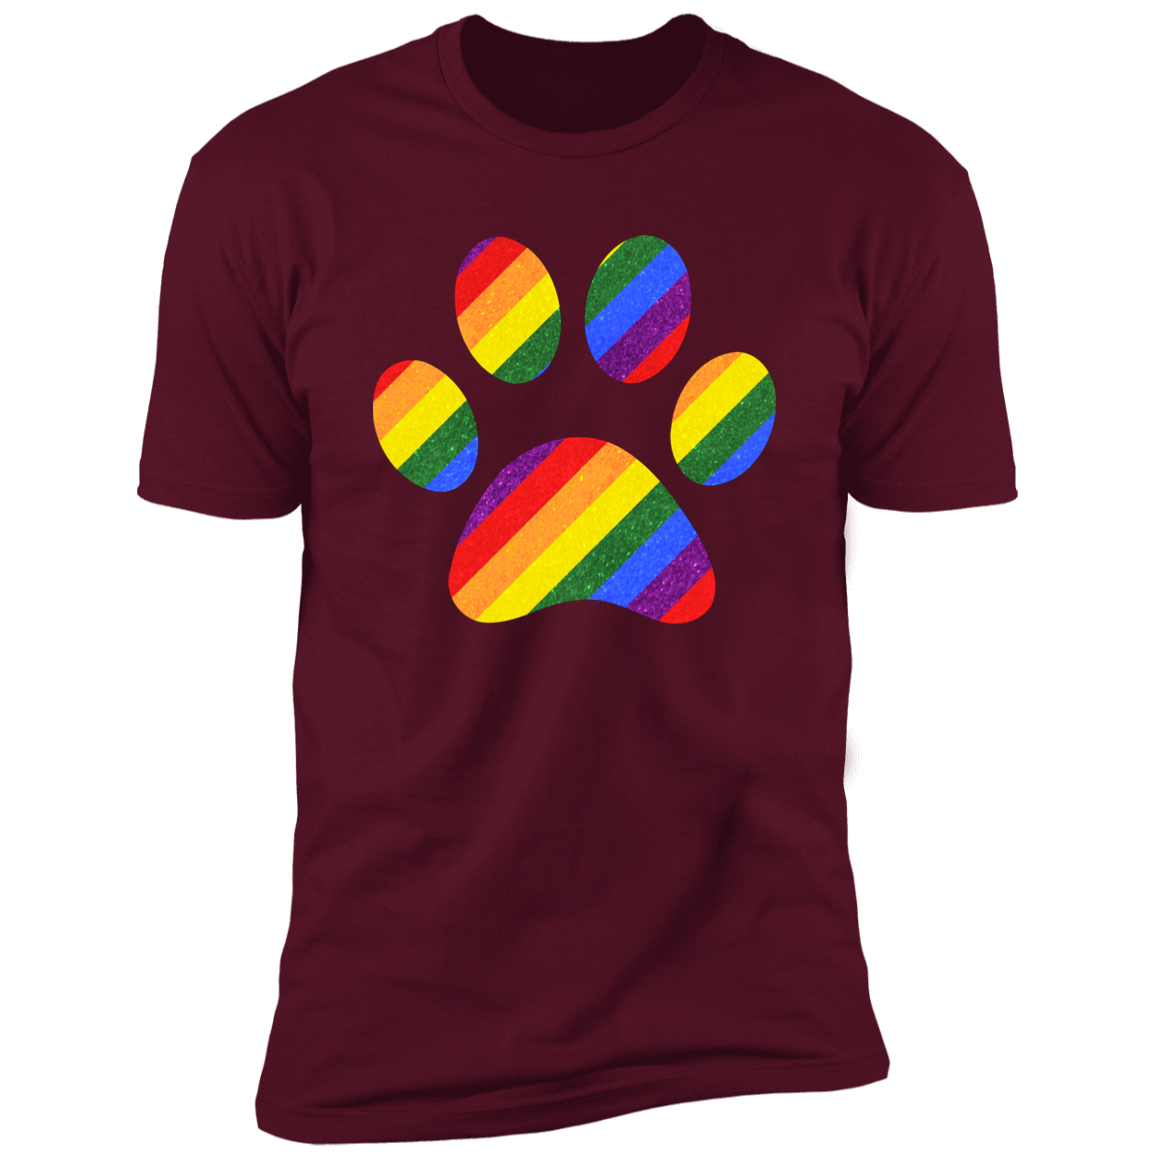 Pride Paw (Sparkles) Pride T-shirt, Paw Pride Dog Shirt for humans, in maroon